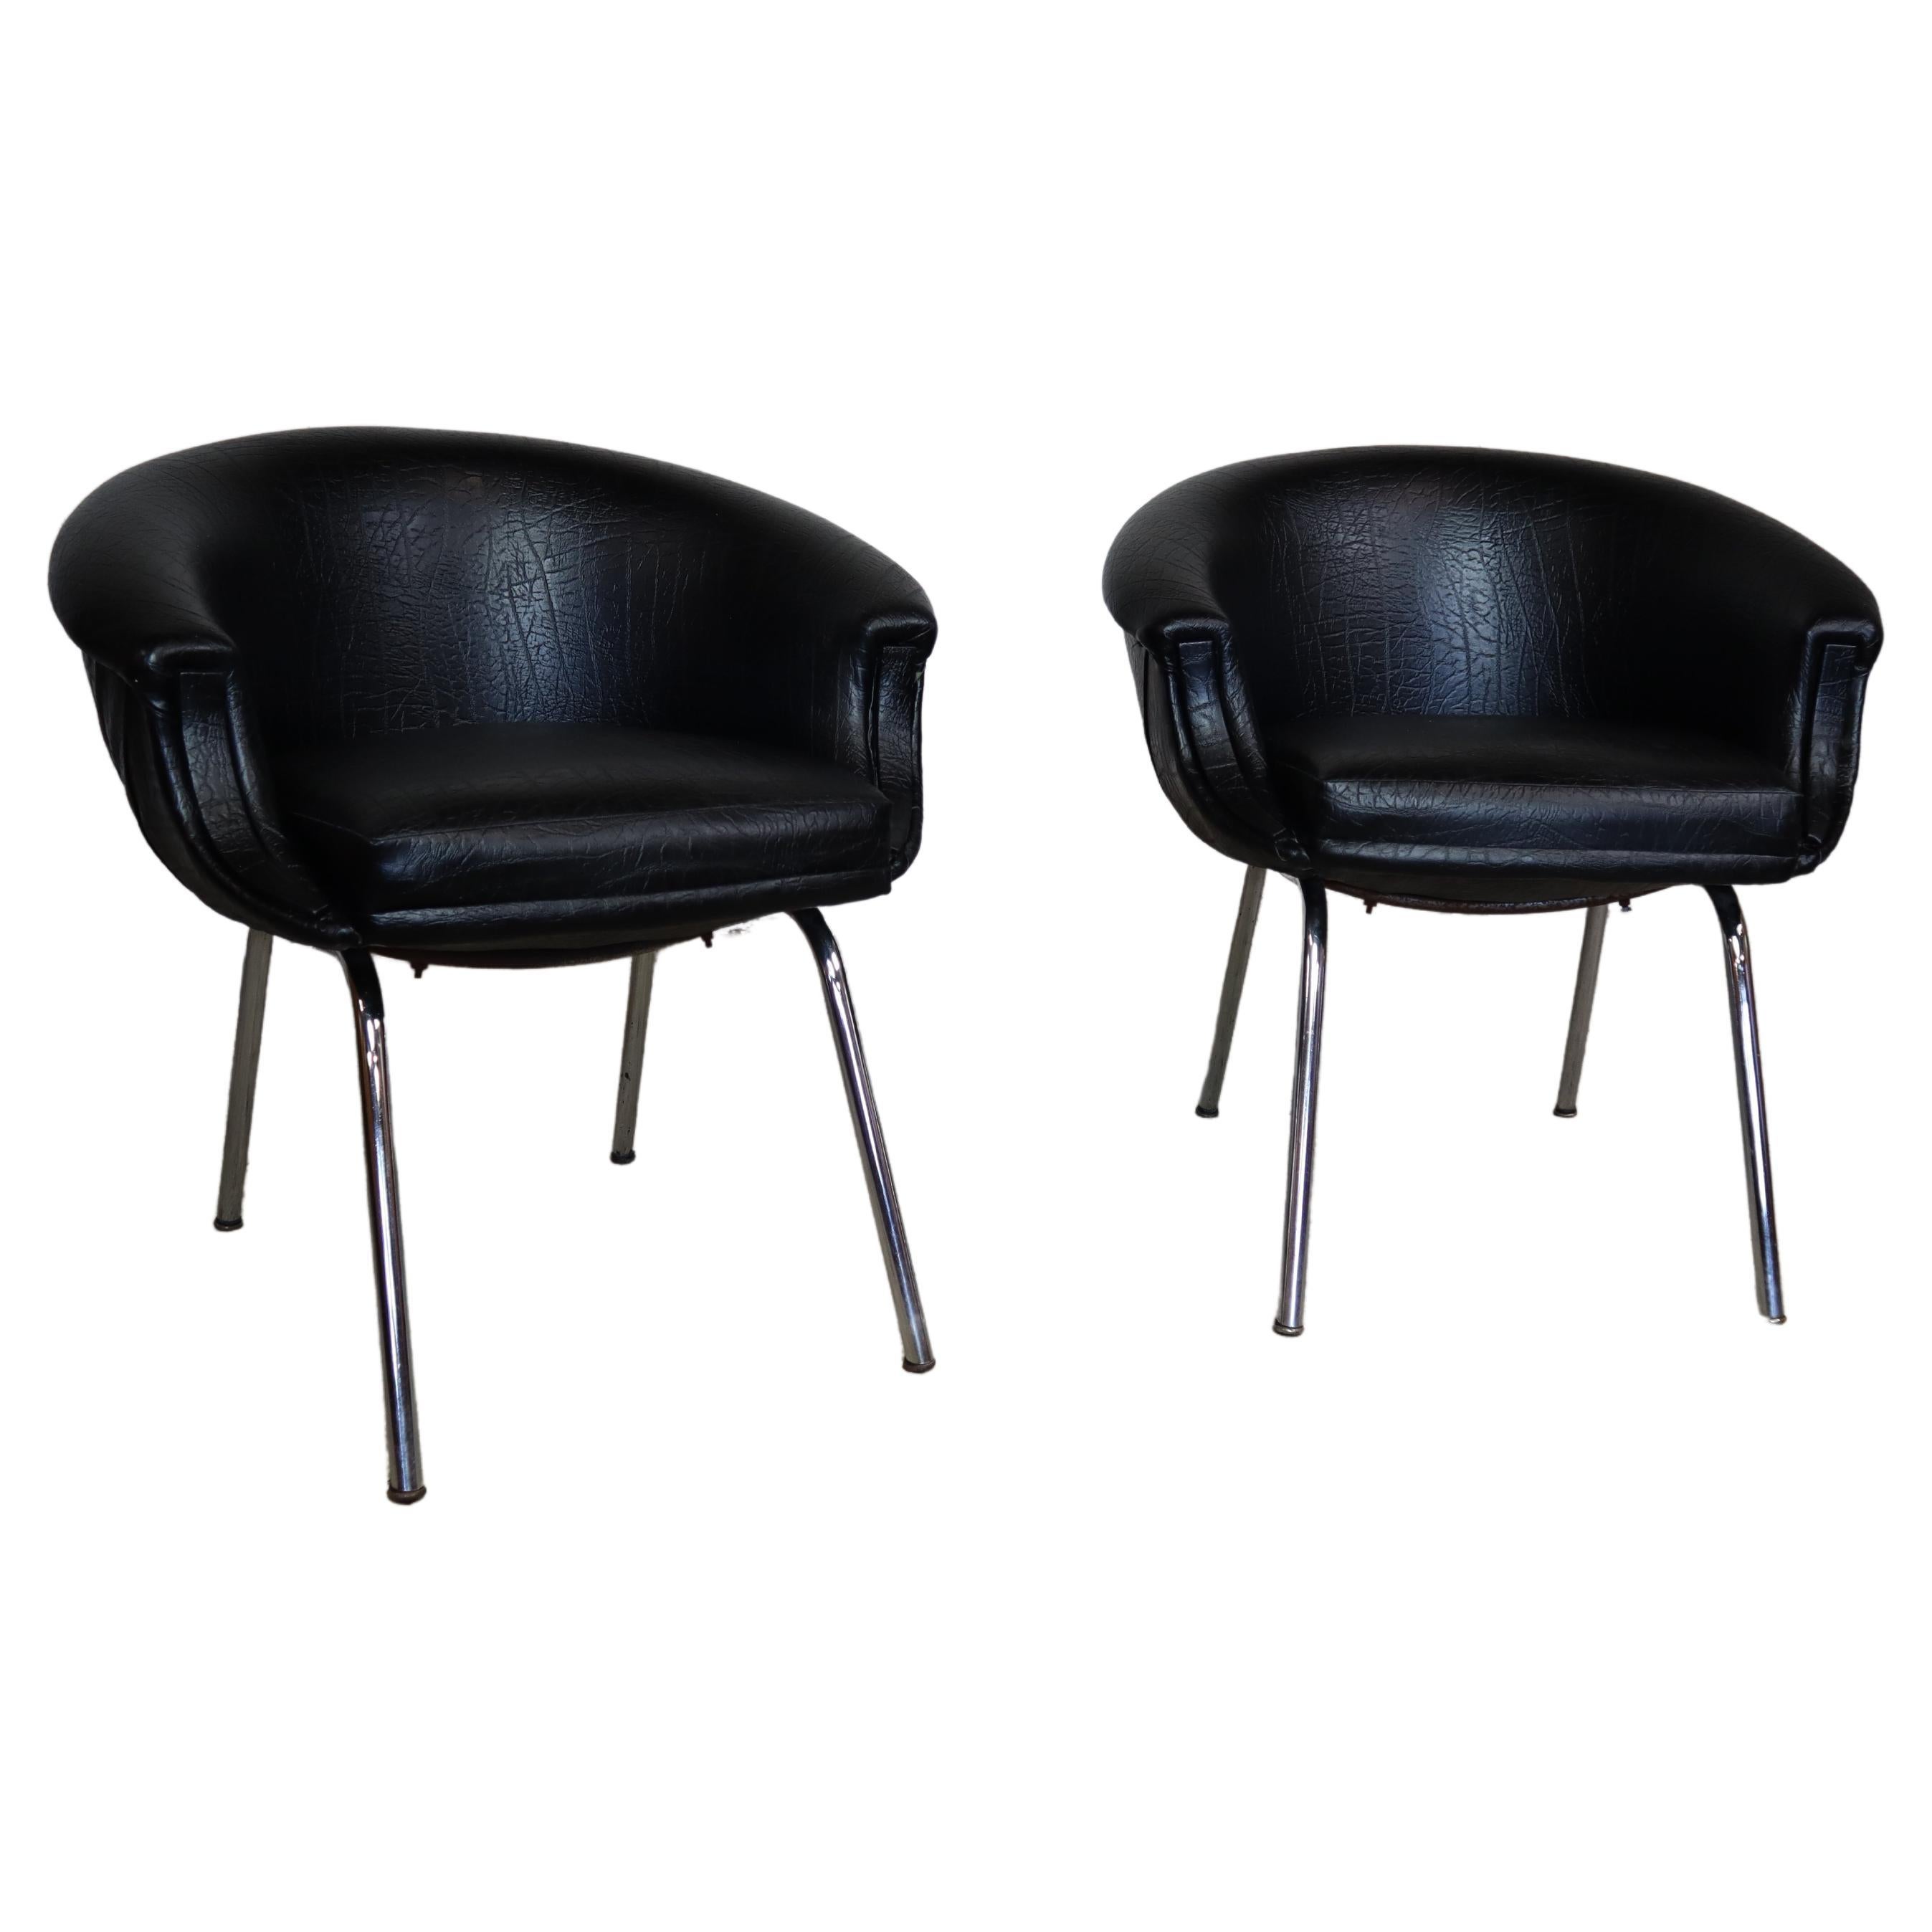 Set of 2 black faux leather Mid-century armchairs